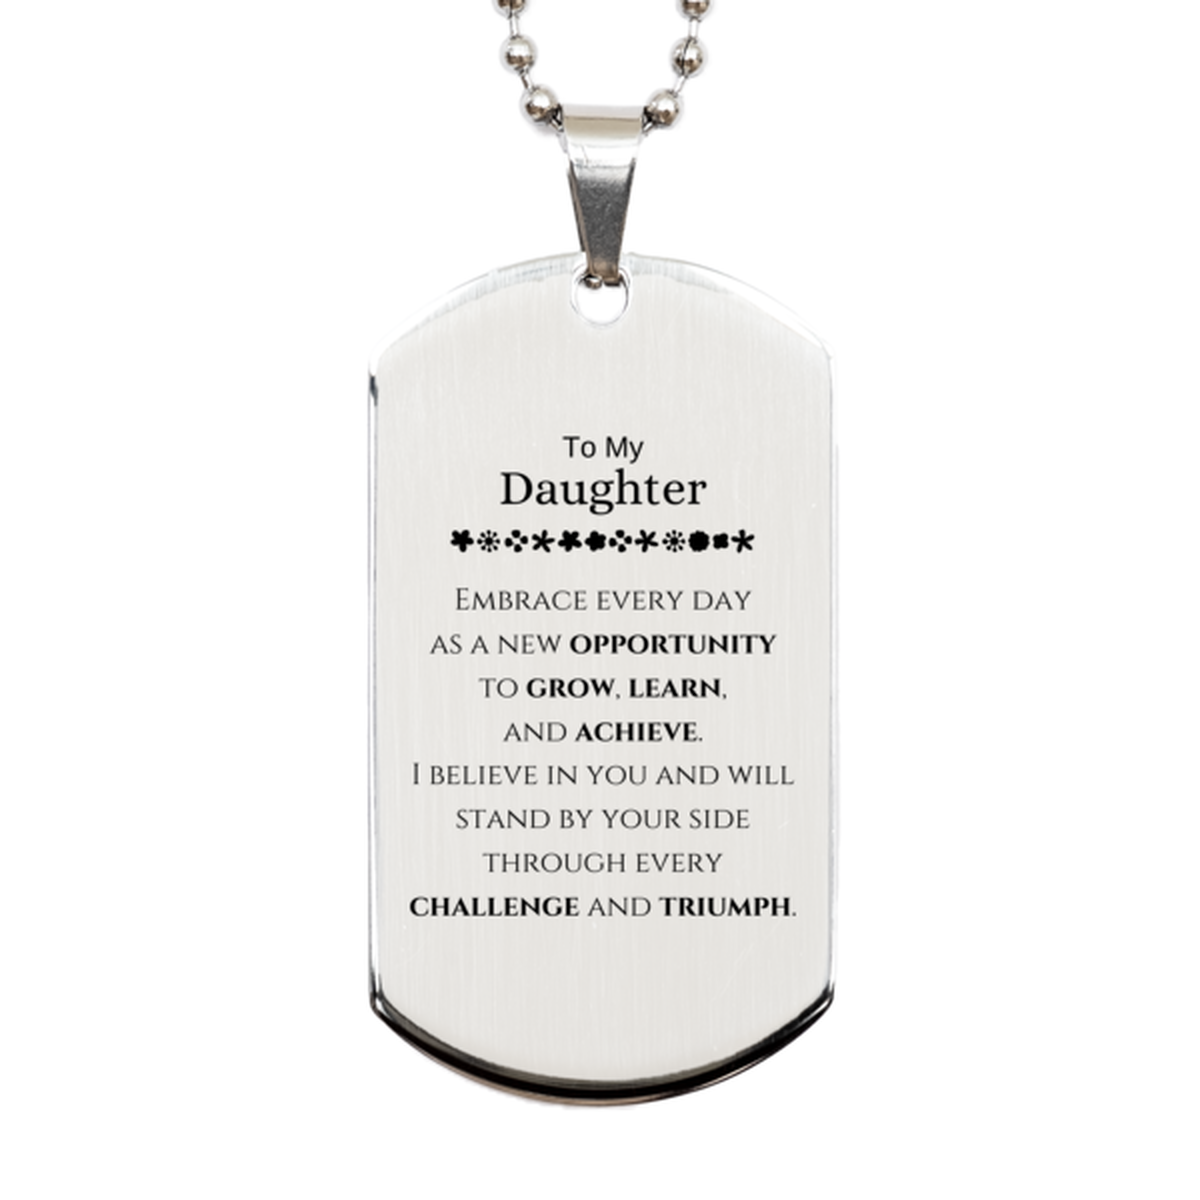 To My Daughter Gifts, I believe in you and will stand by your side, Inspirational Silver Dog Tag For Daughter, Birthday Christmas Motivational Daughter Gifts